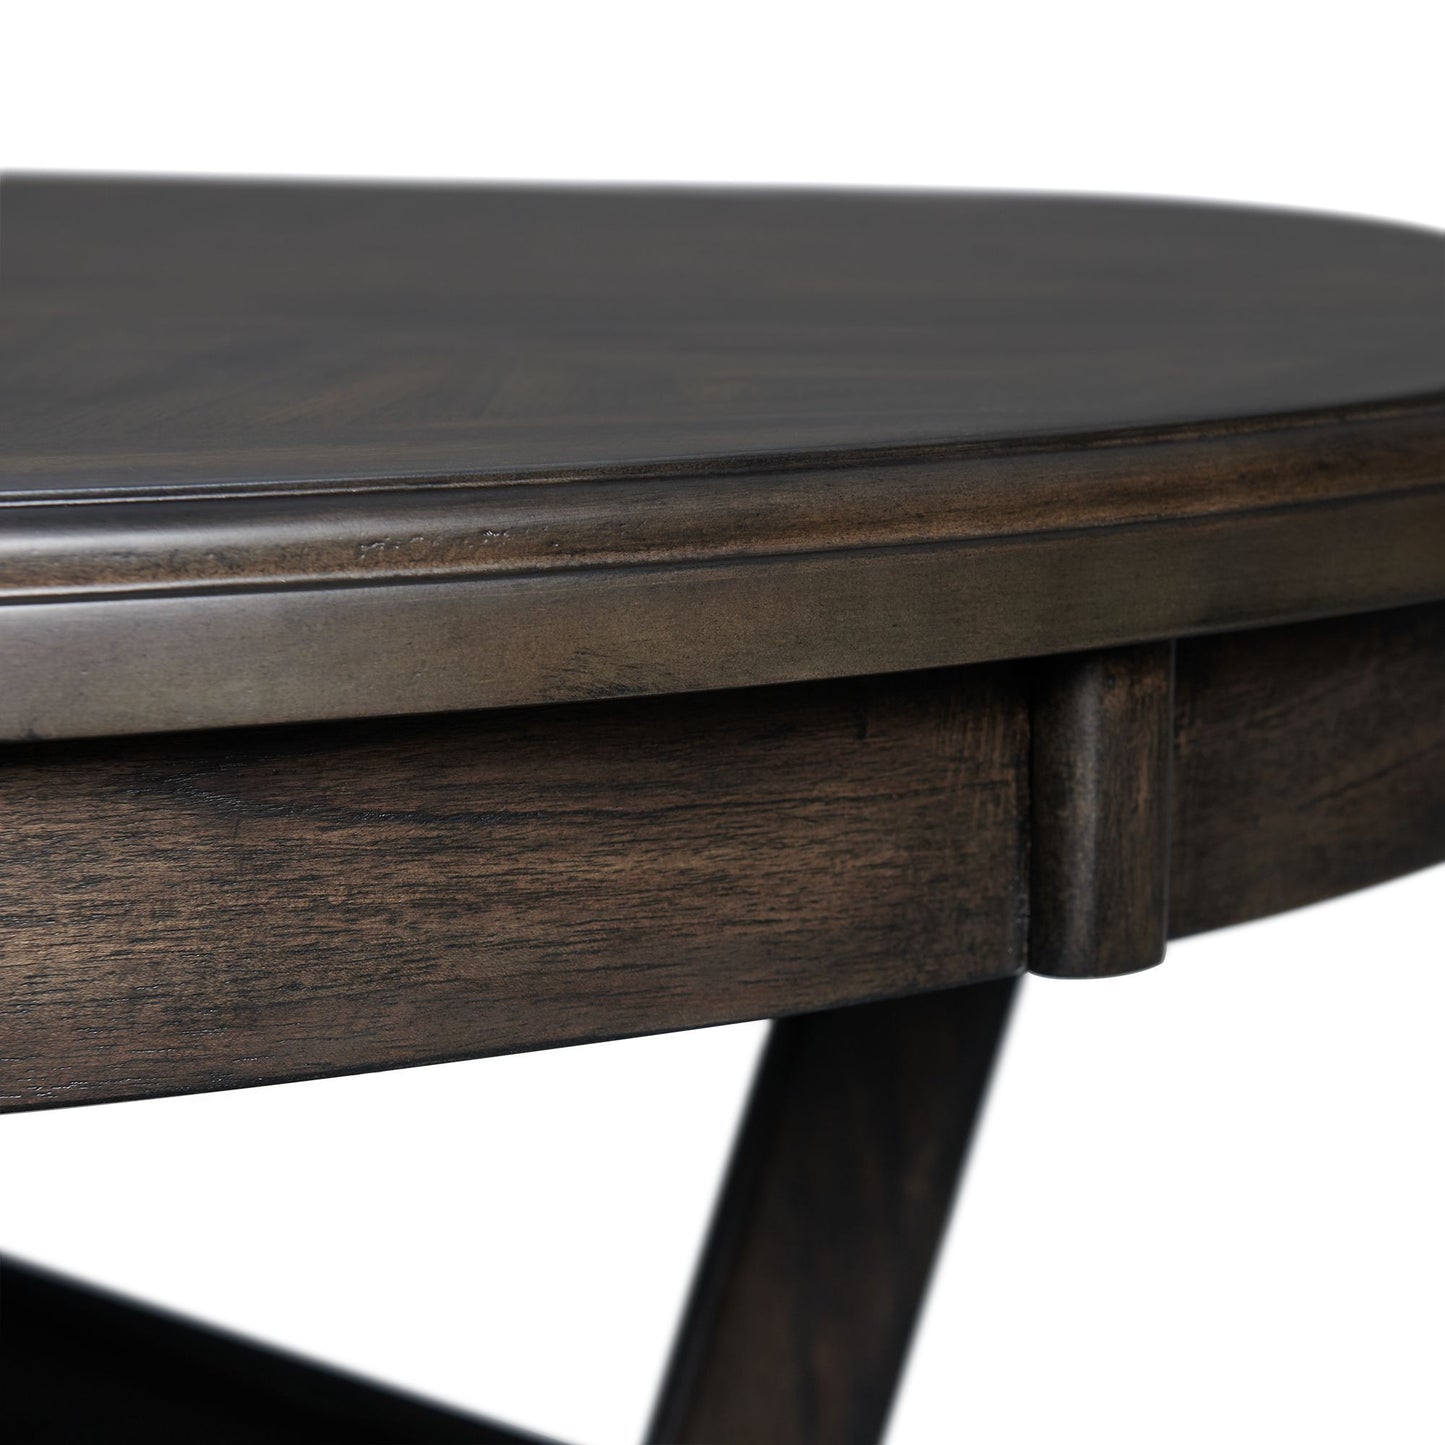 Amherst - Standard Height Dining Table